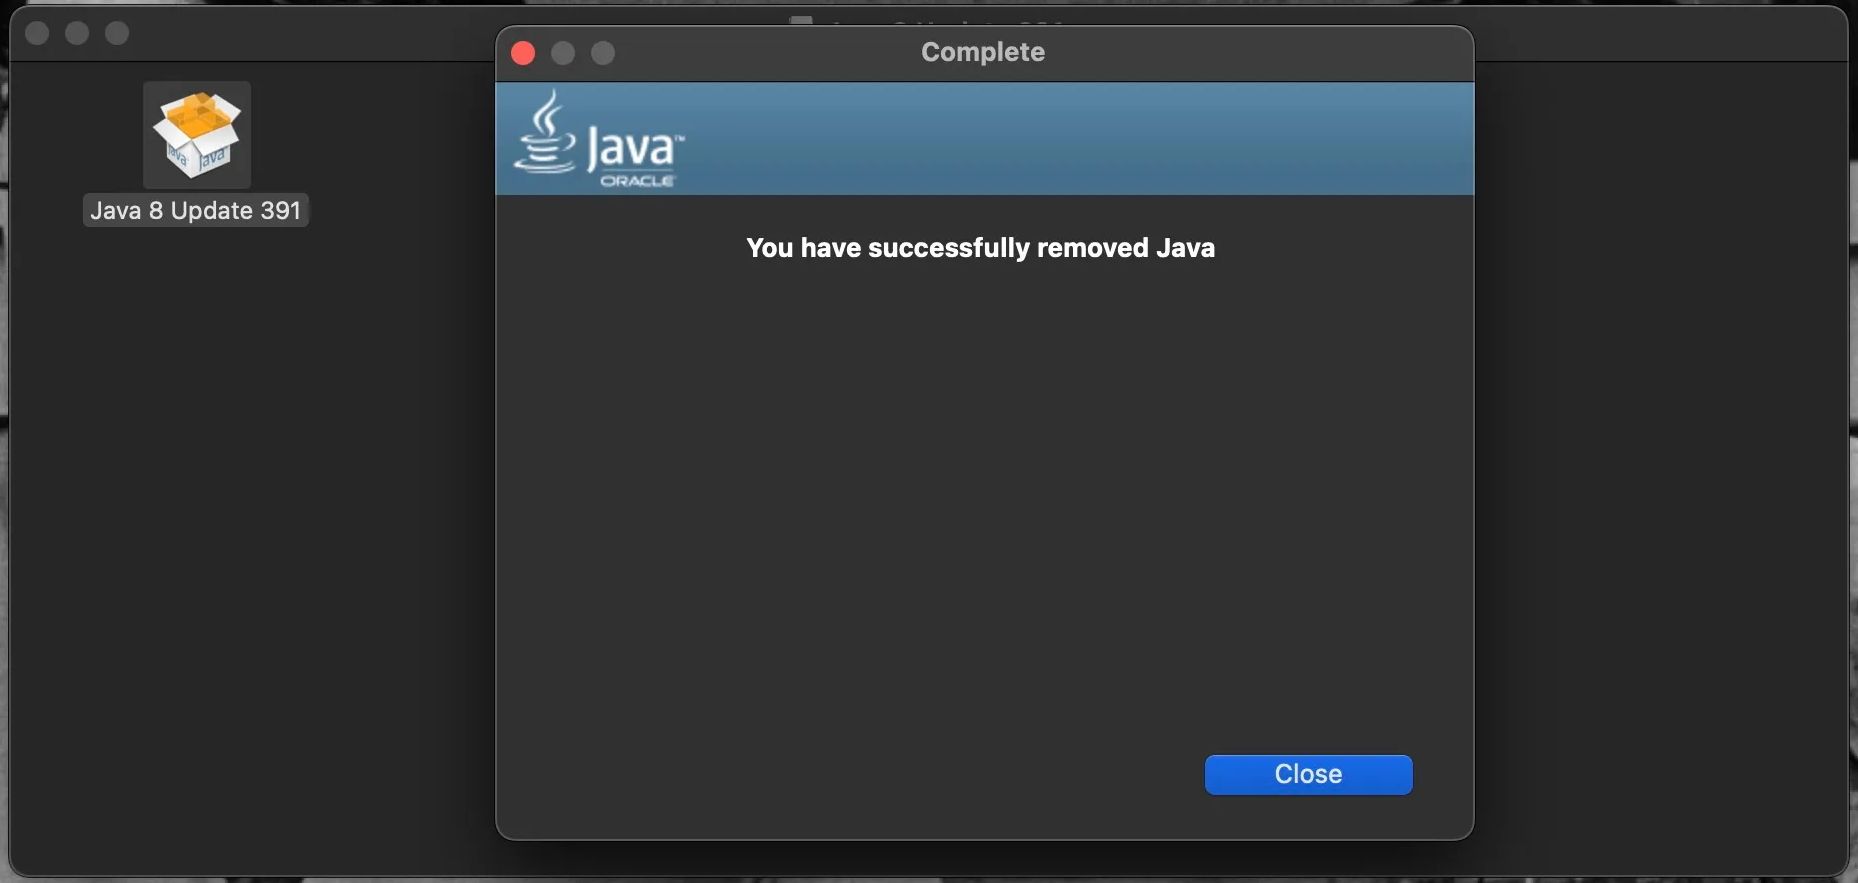 java removed message in macOS